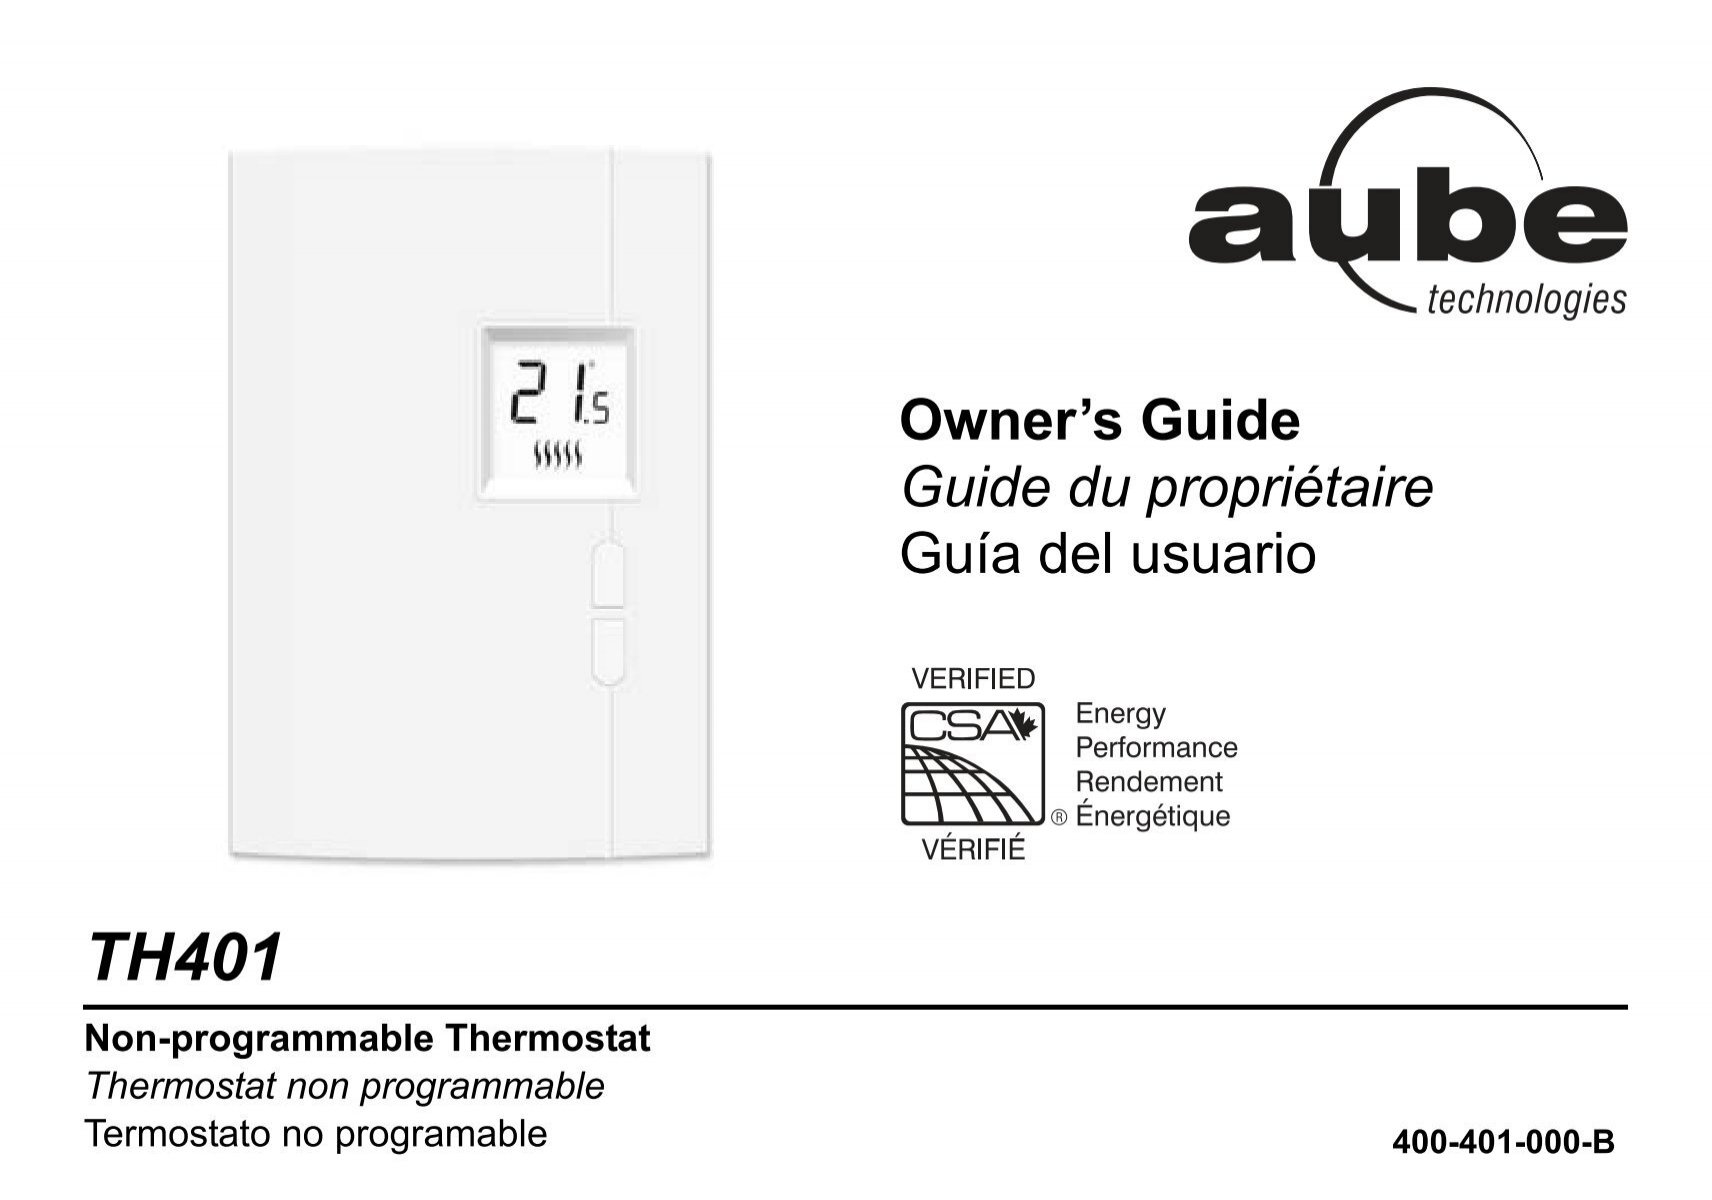 TH401 Honeywell / Aube Non-Programmable Wall Thermostat